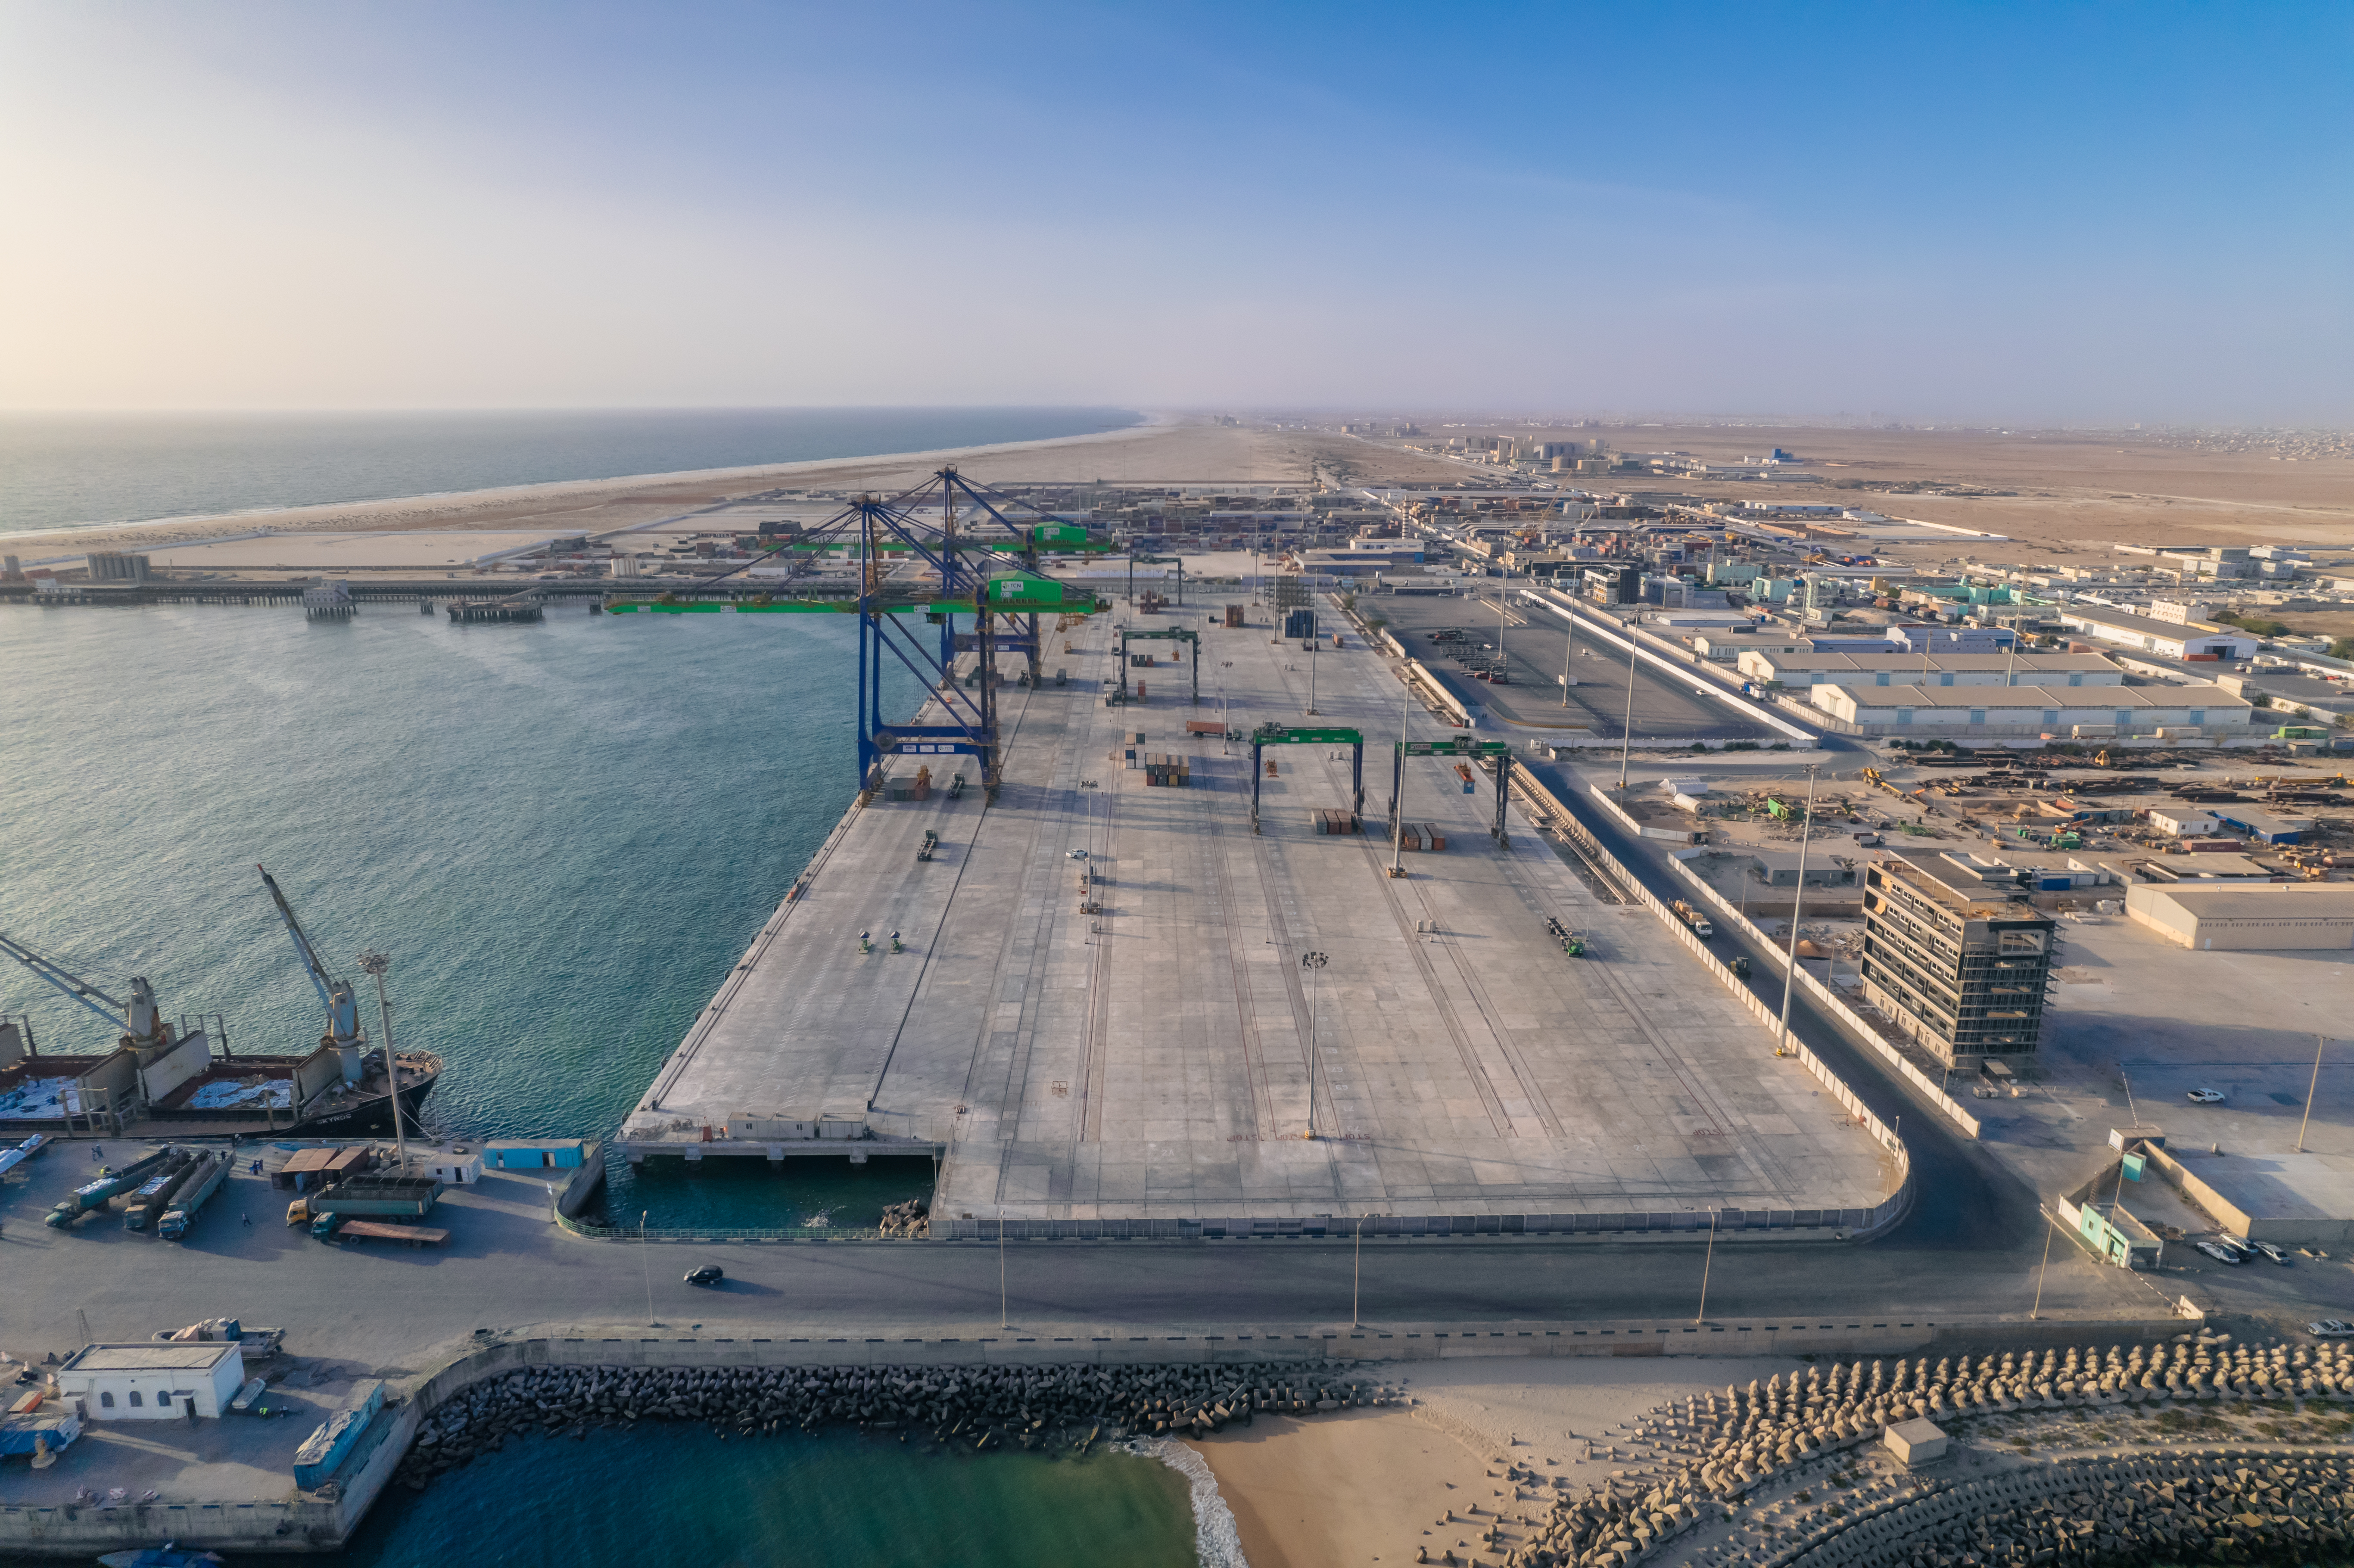 First-ever STS gantry cranes at the port with end-to-end movement capability